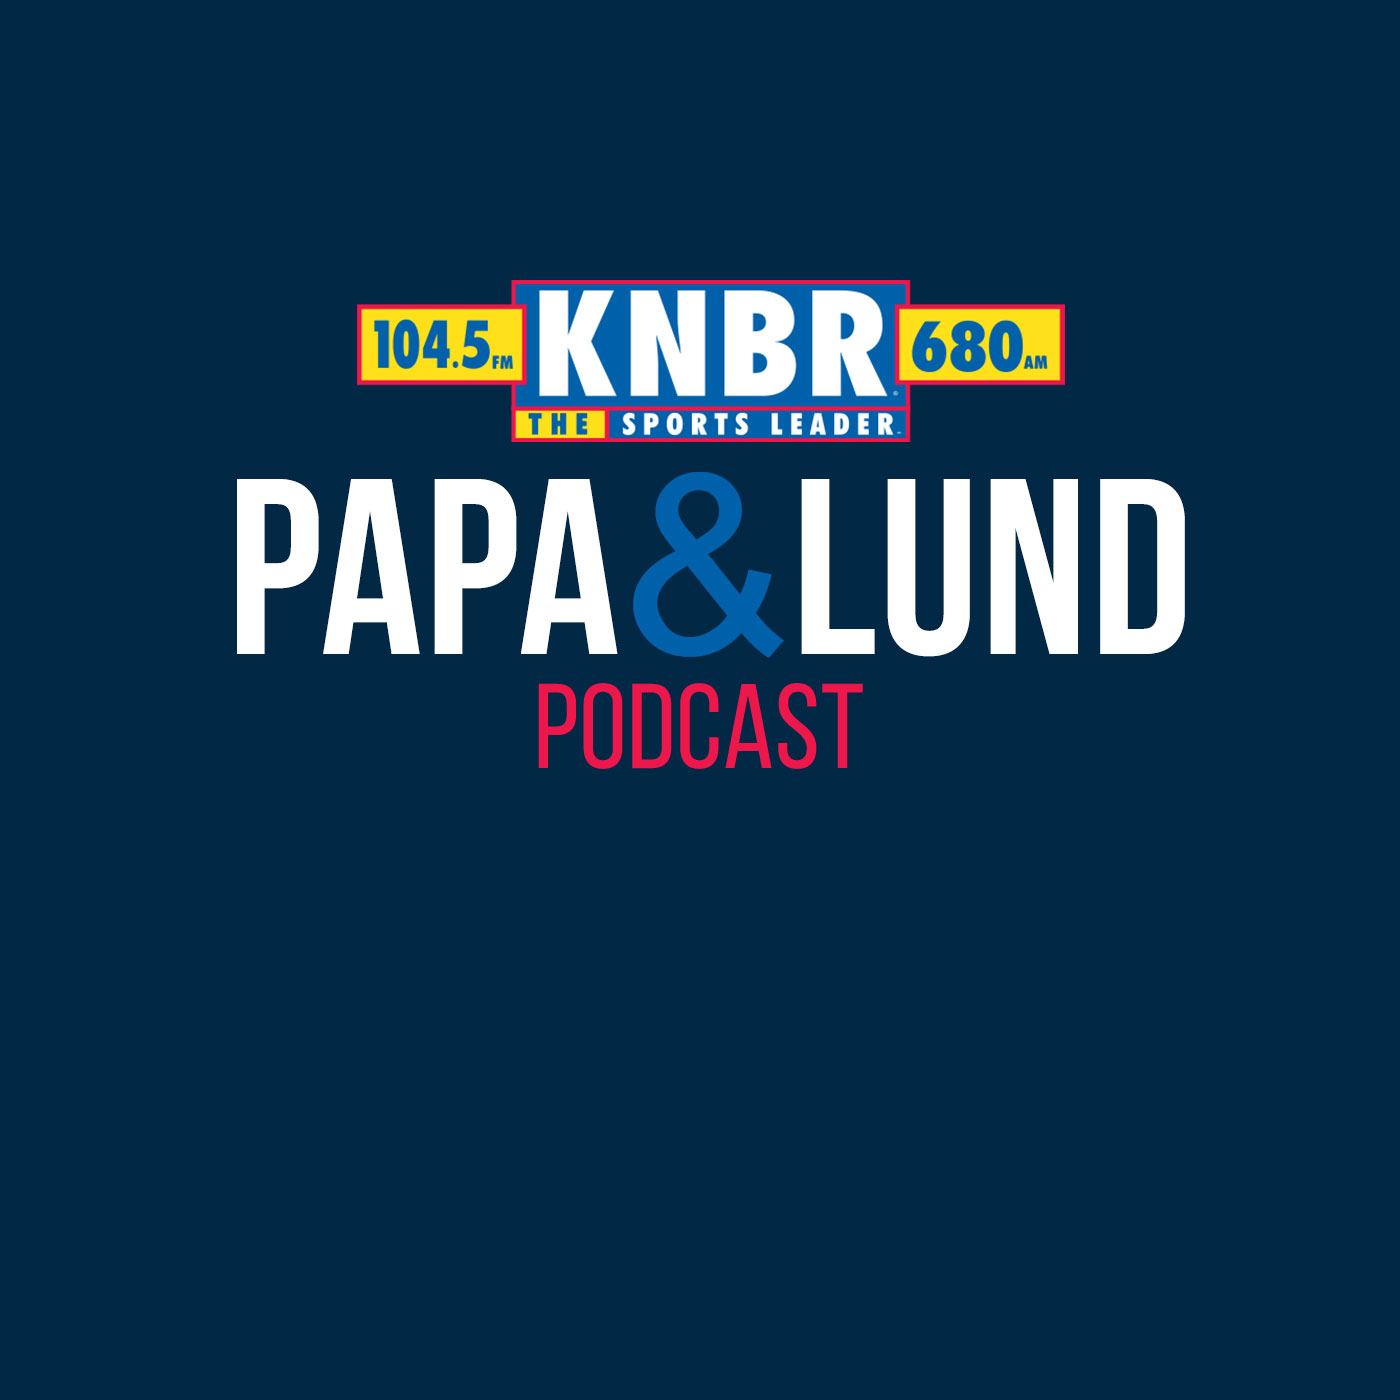 6-6 Jon Morosi joins Papa & Lund to discuss the Giants being in the middle of, trying to win, and wanting to develop players on their roster and what would be best for the organization moving forward